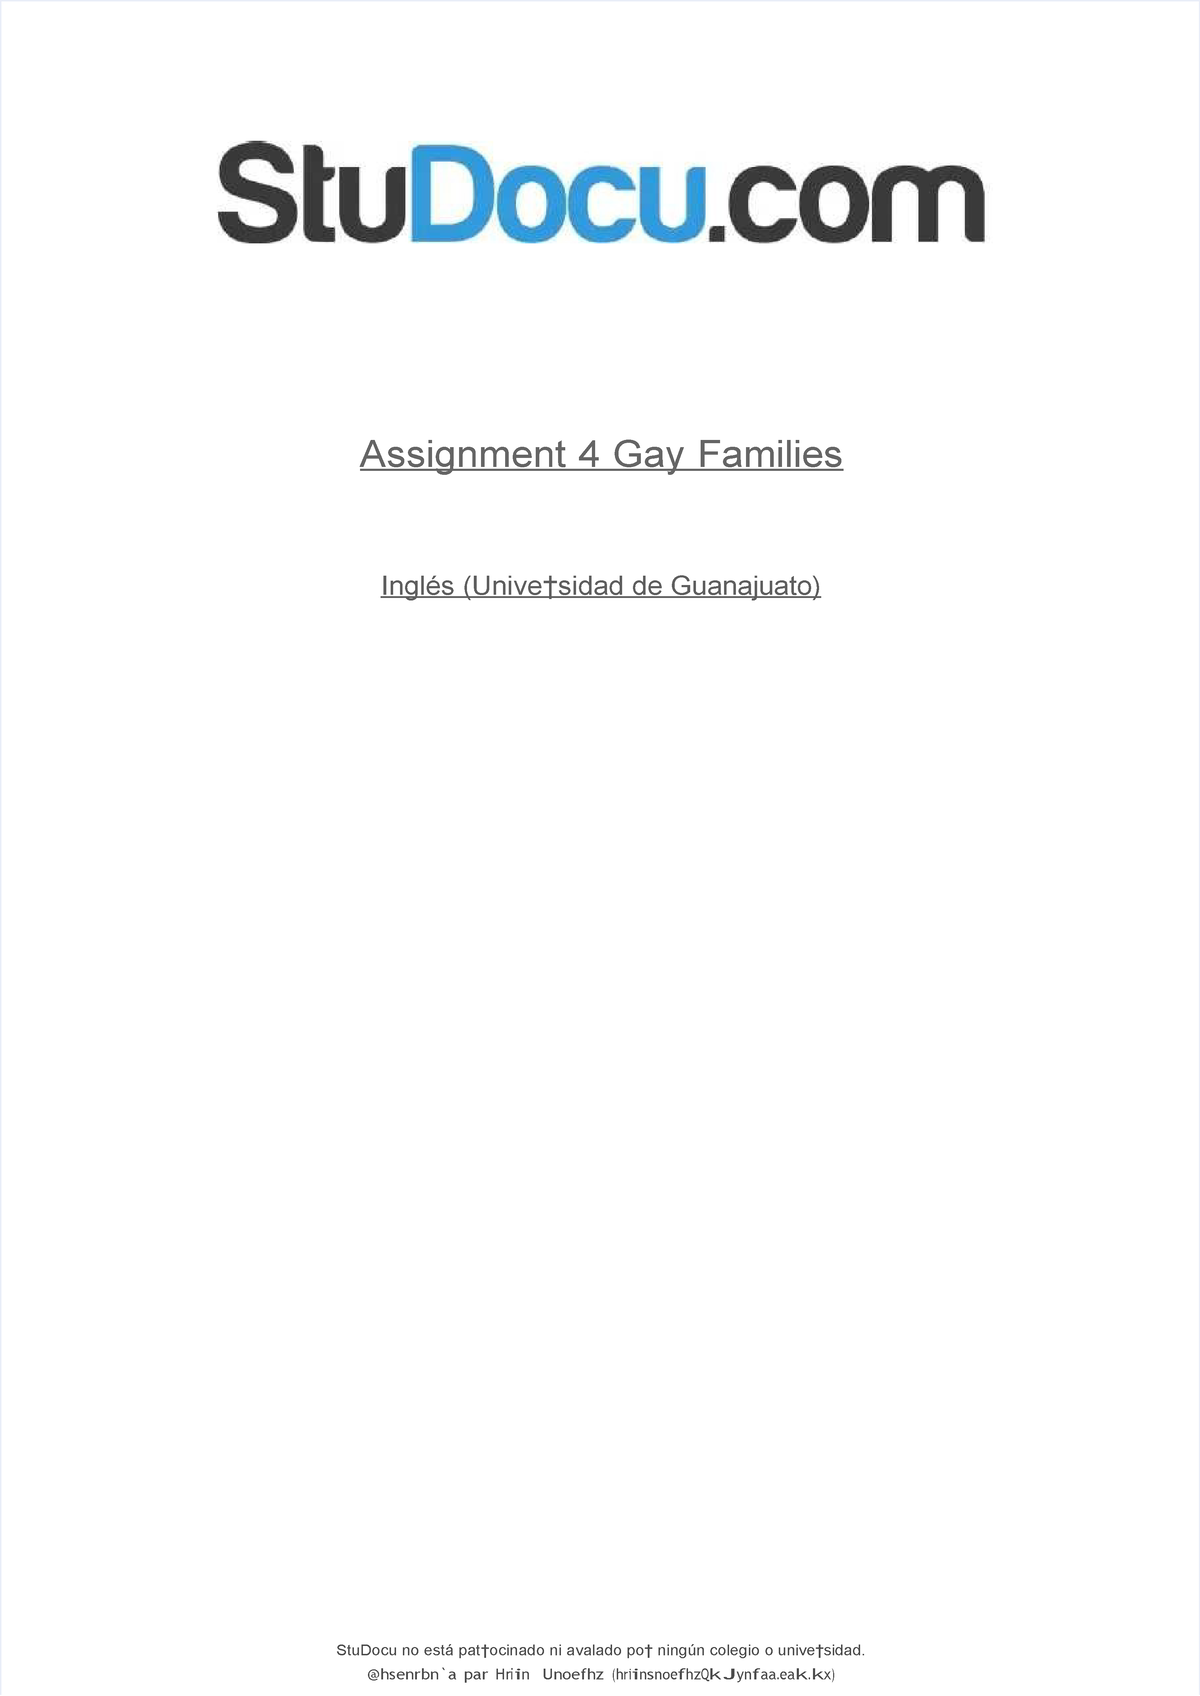 assignment 4 gay families uveg